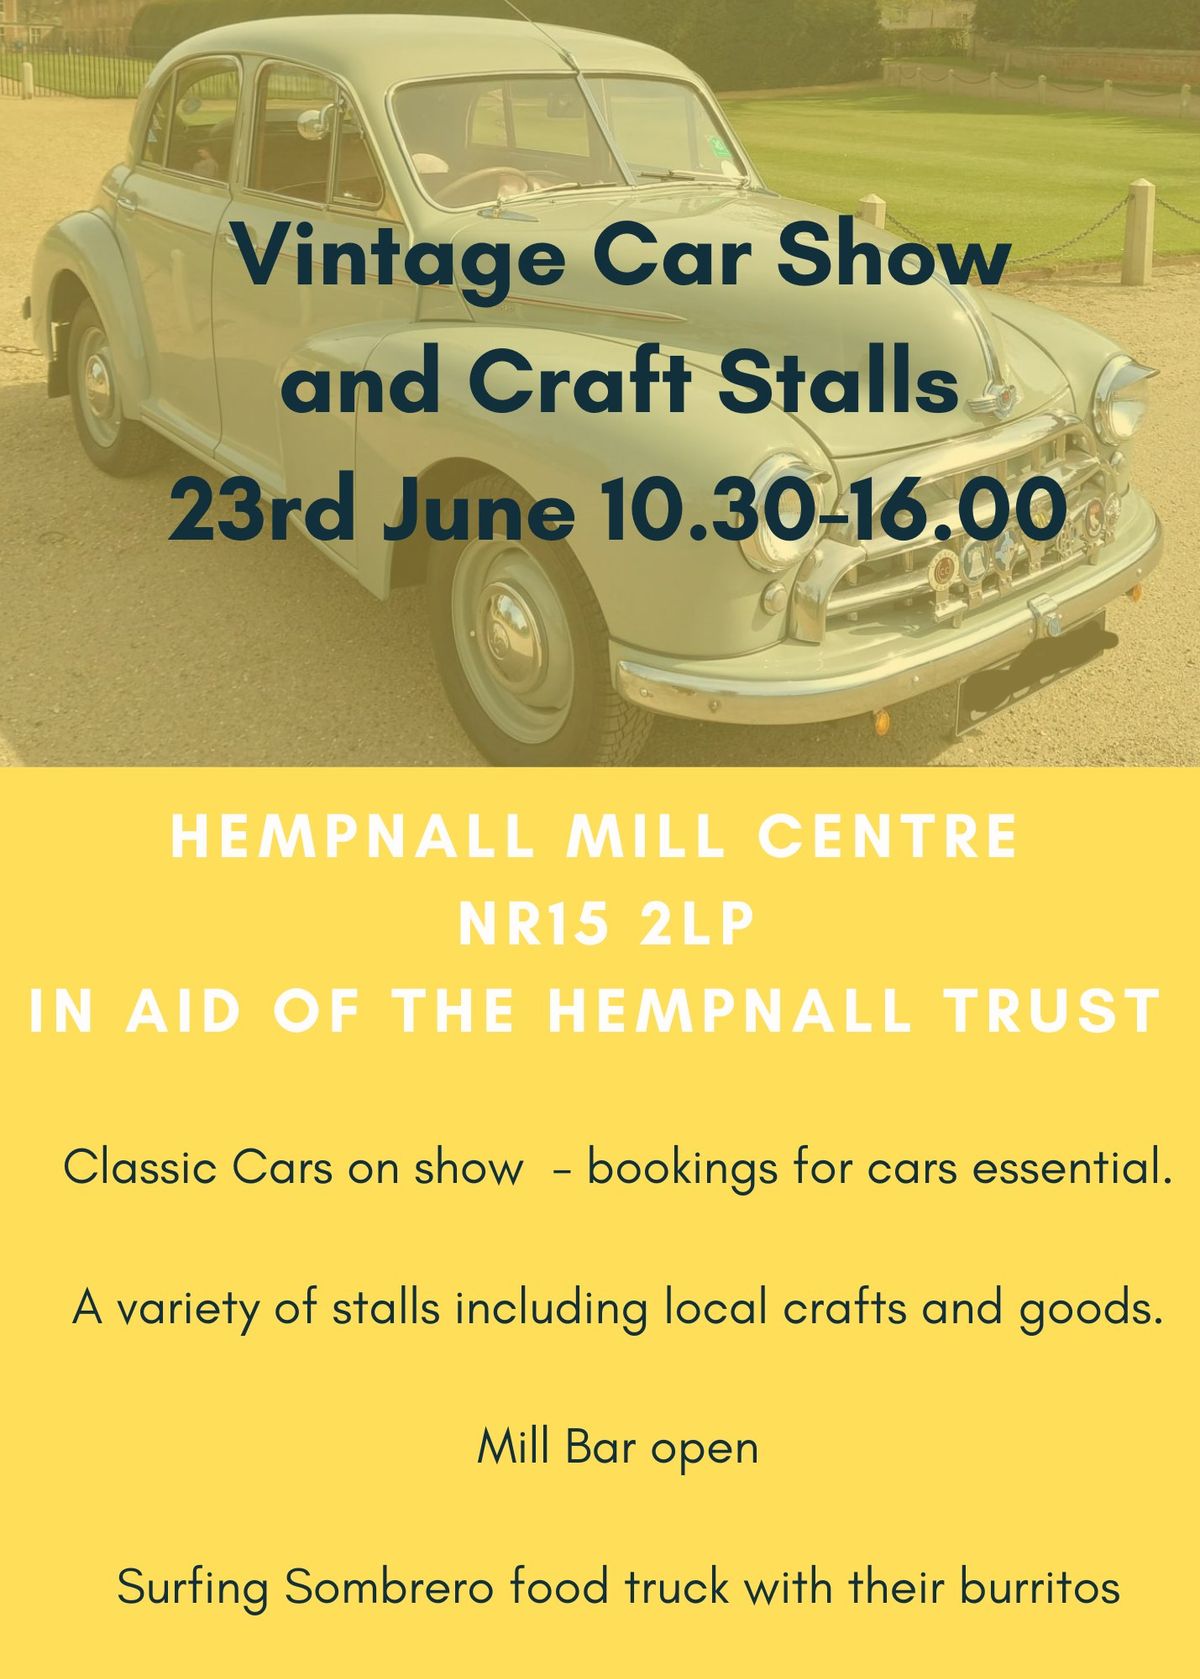 Vintage Car Show and Craft Stalls